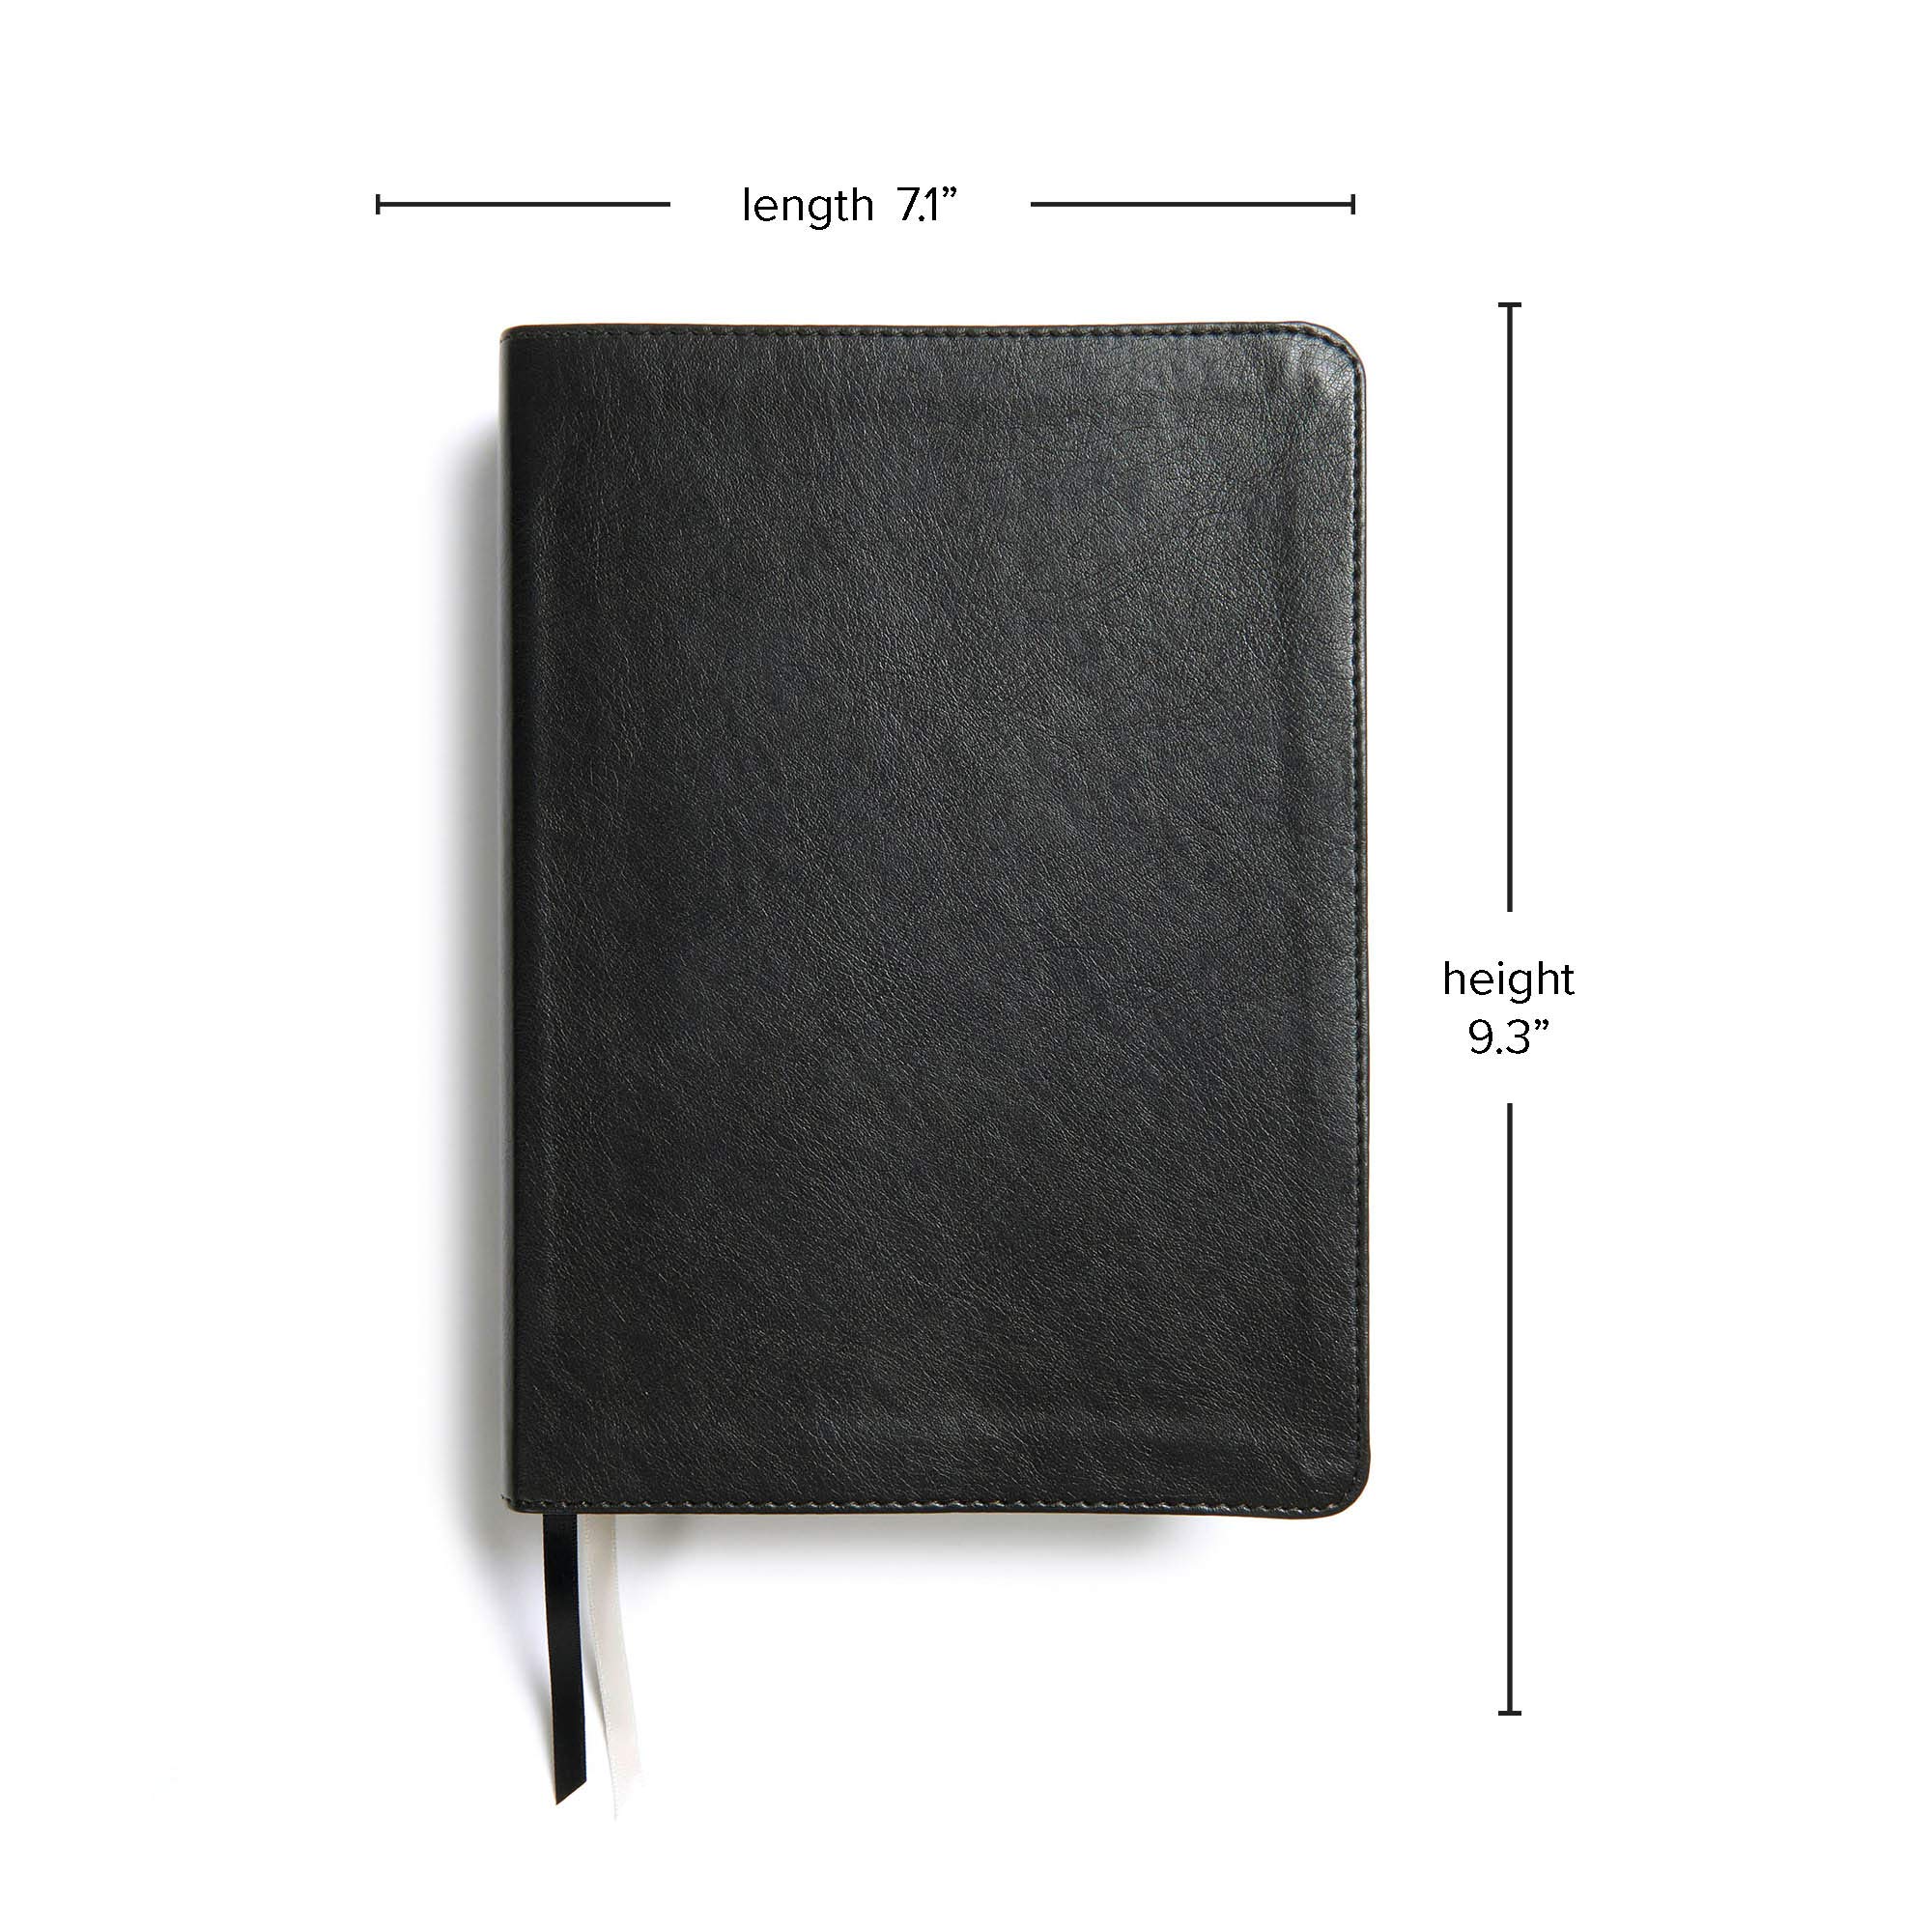 CSB He Reads Truth Bible, Black LeatherTouch, Black Letter, Wide Margins, Journaling Space, Illustrations, Reading Plans, Single-Column, Easy-to-Read Bible Serif Type